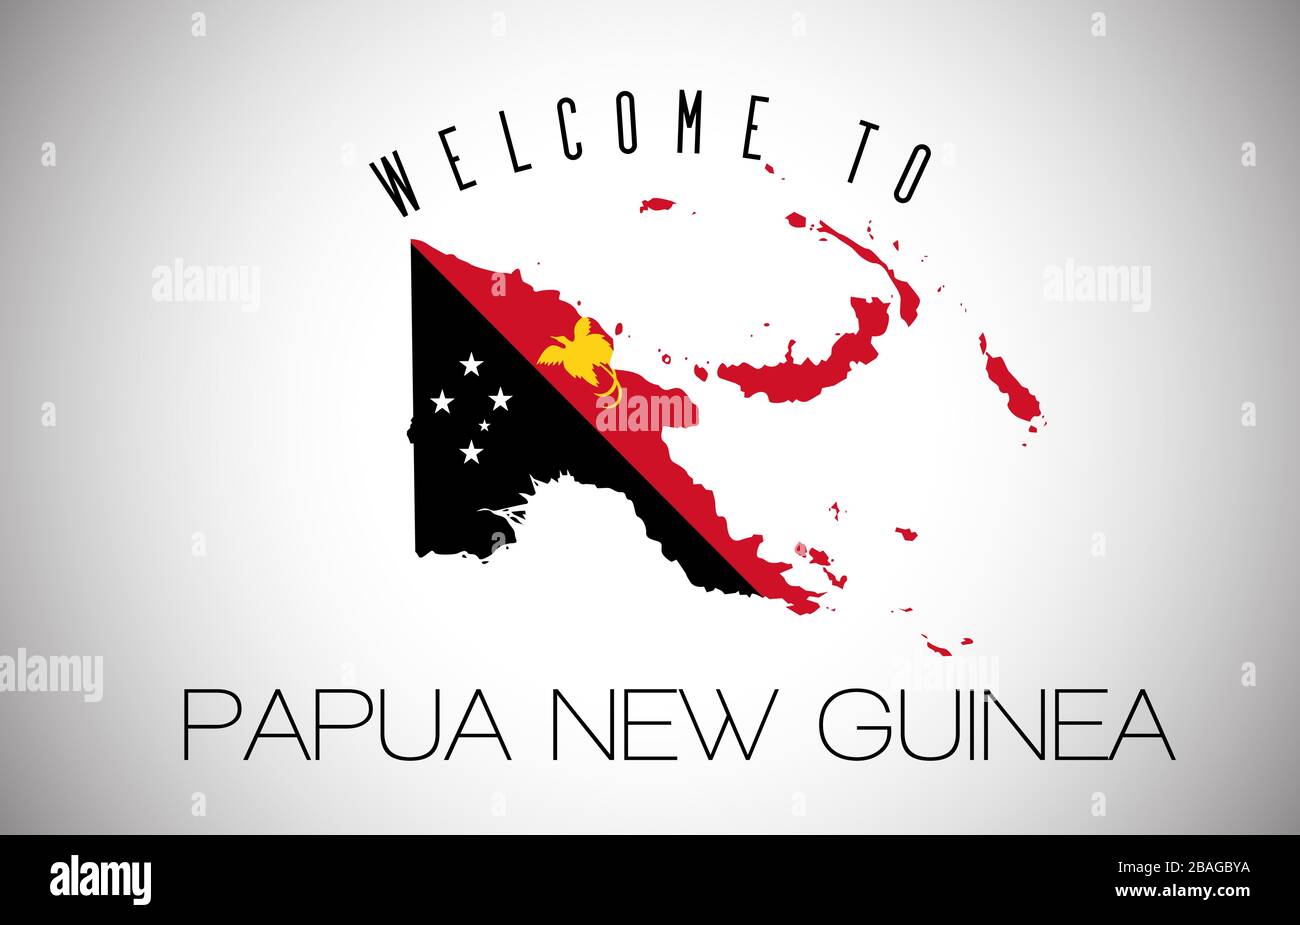 Papua New Guinea Welcome to Text and Country flag inside Country Border Map. Papua New Guinea map with national flag Vector Design Illustration. Stock Vector